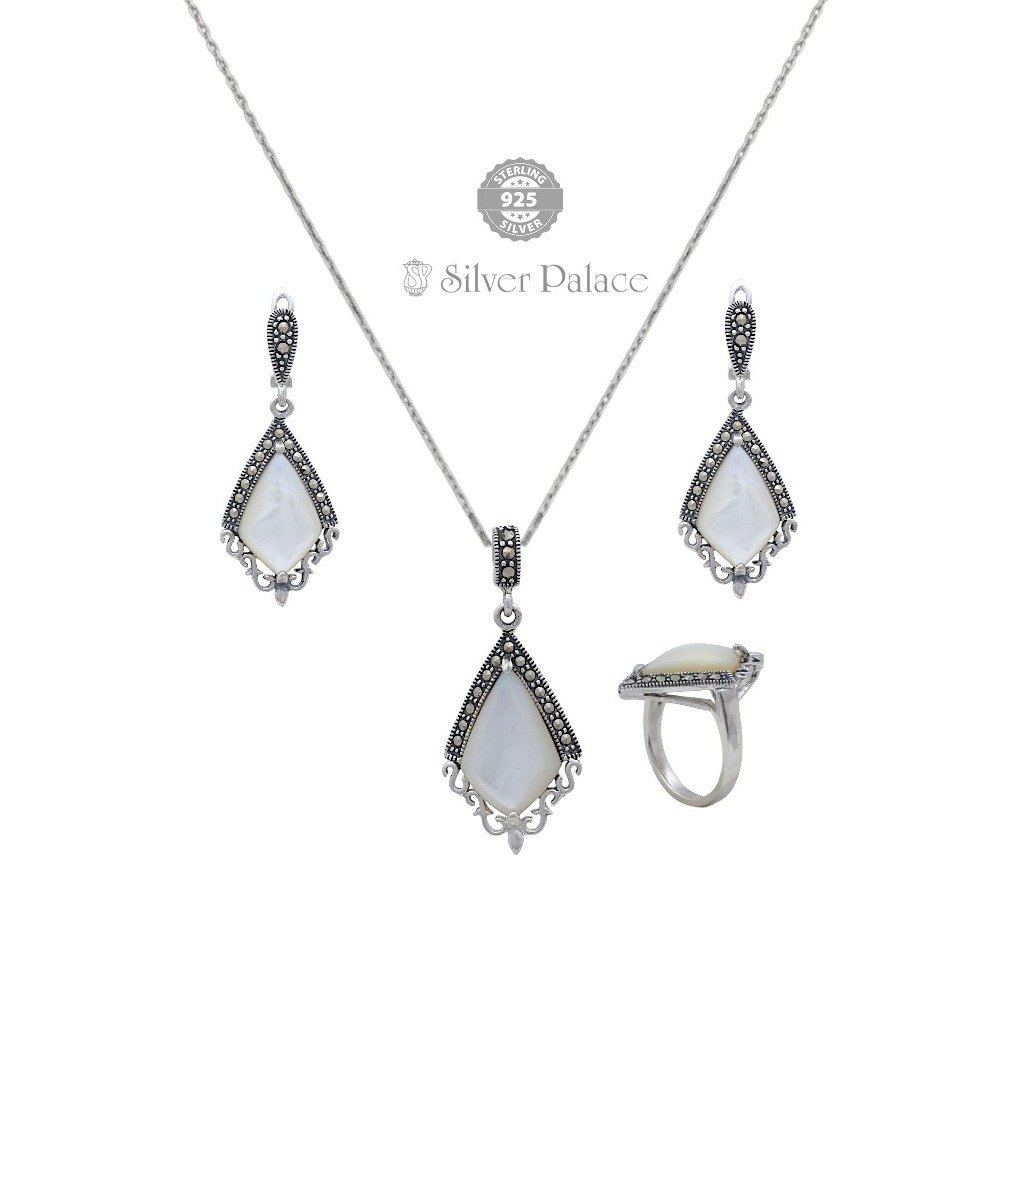 925 SILVER PRITE' COLLECTIONS MOP AND MARCASITE PENDANT WITH MATCHING EARRINGS & RING FOR FUNCTION  USES